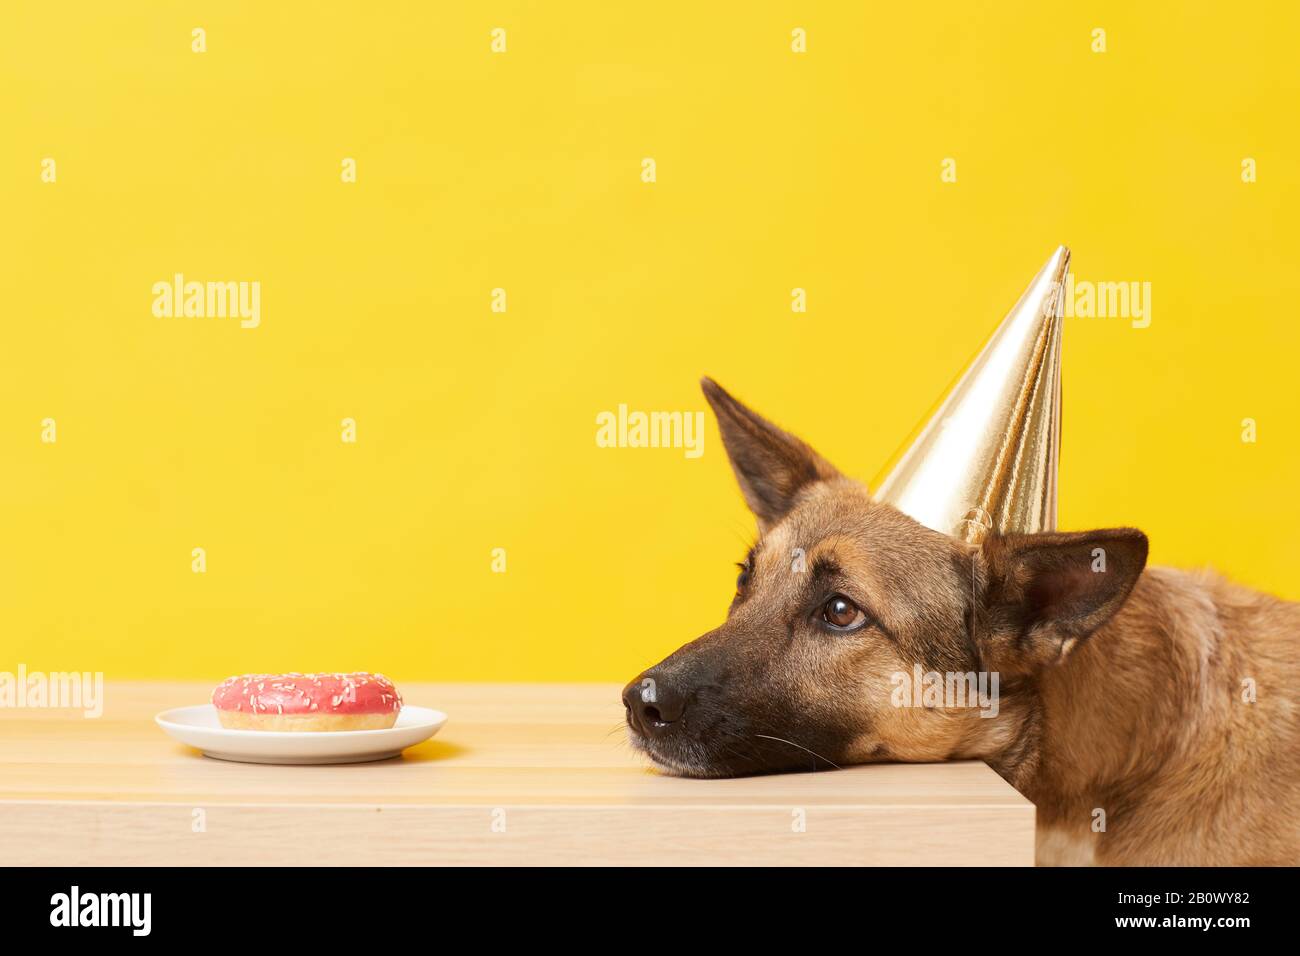 German shepherd in hat waiting for the order to eat cake on the table against the yellow background Stock Photo